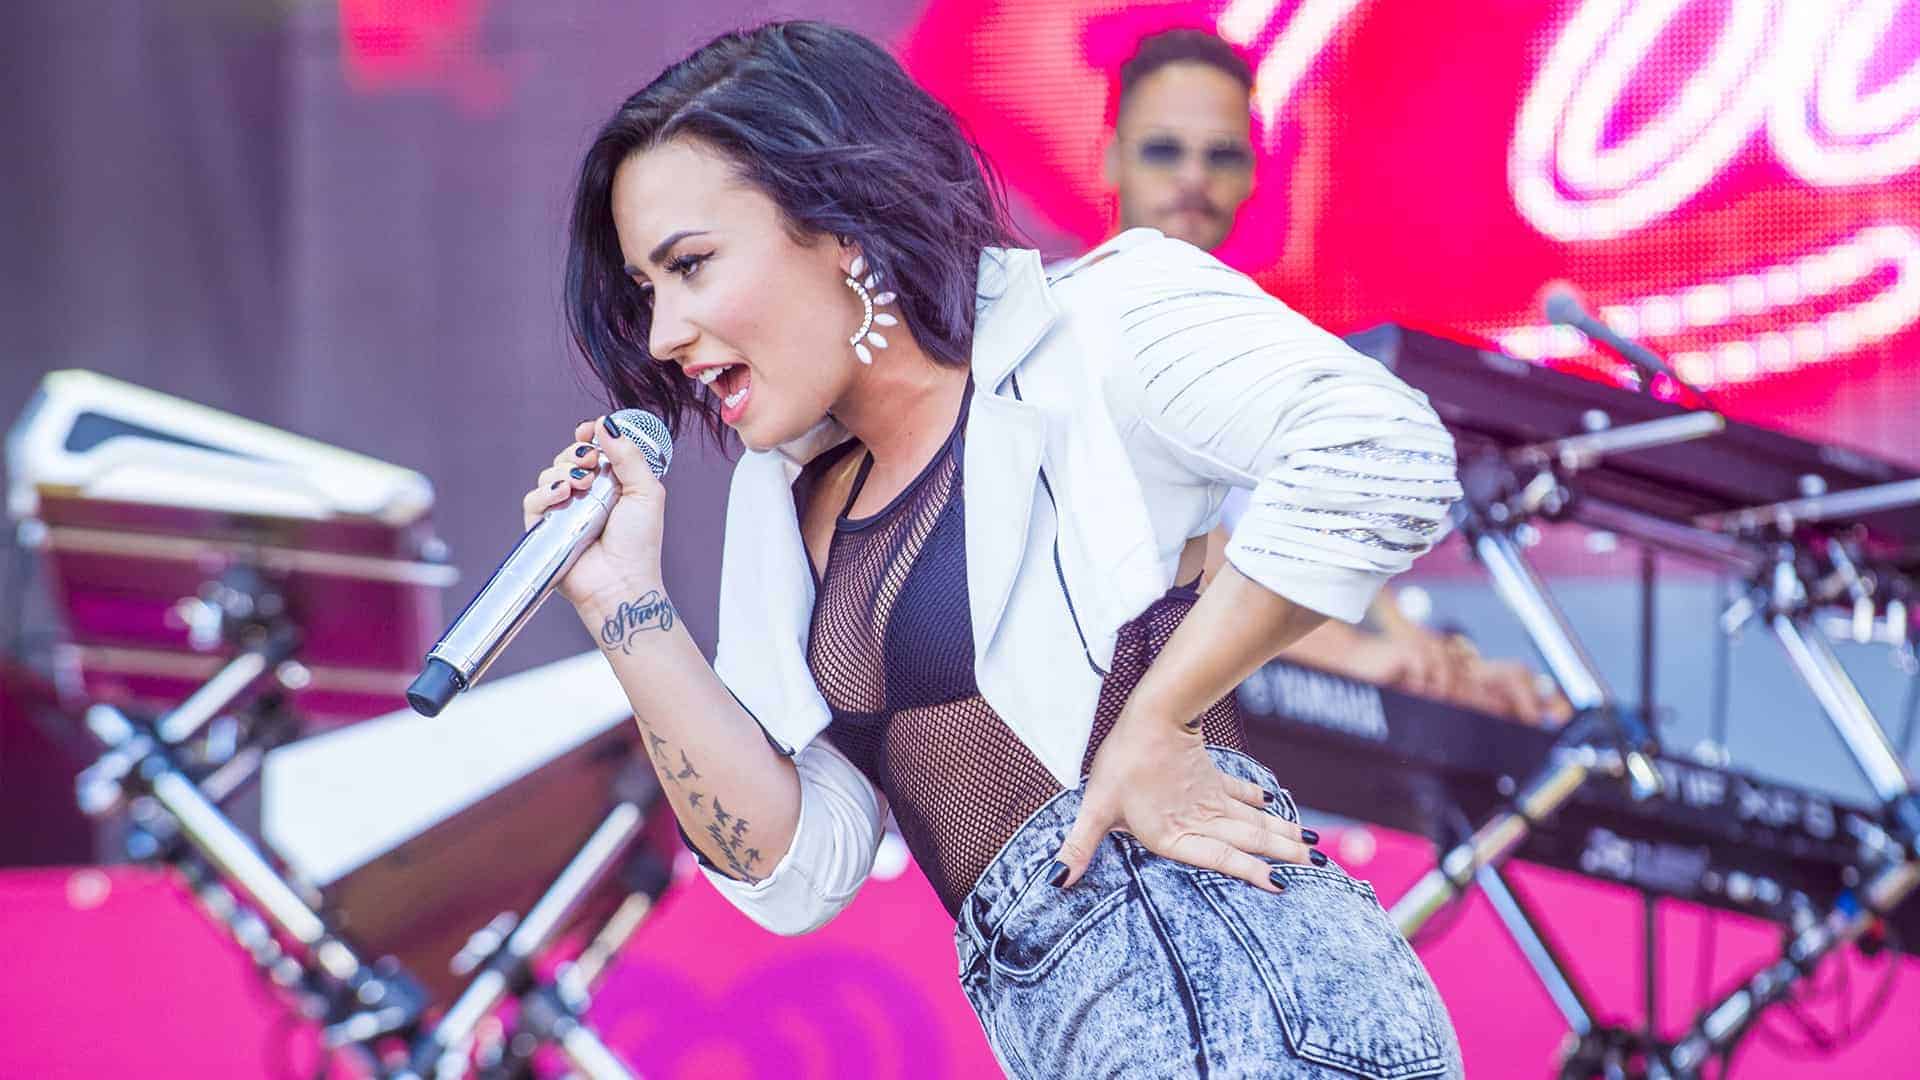 Demi Lovato has never been shy about her struggles with drug and alcohol addiction.|Demi Lovato has never been shy about her struggles with drug and alcohol addiction.